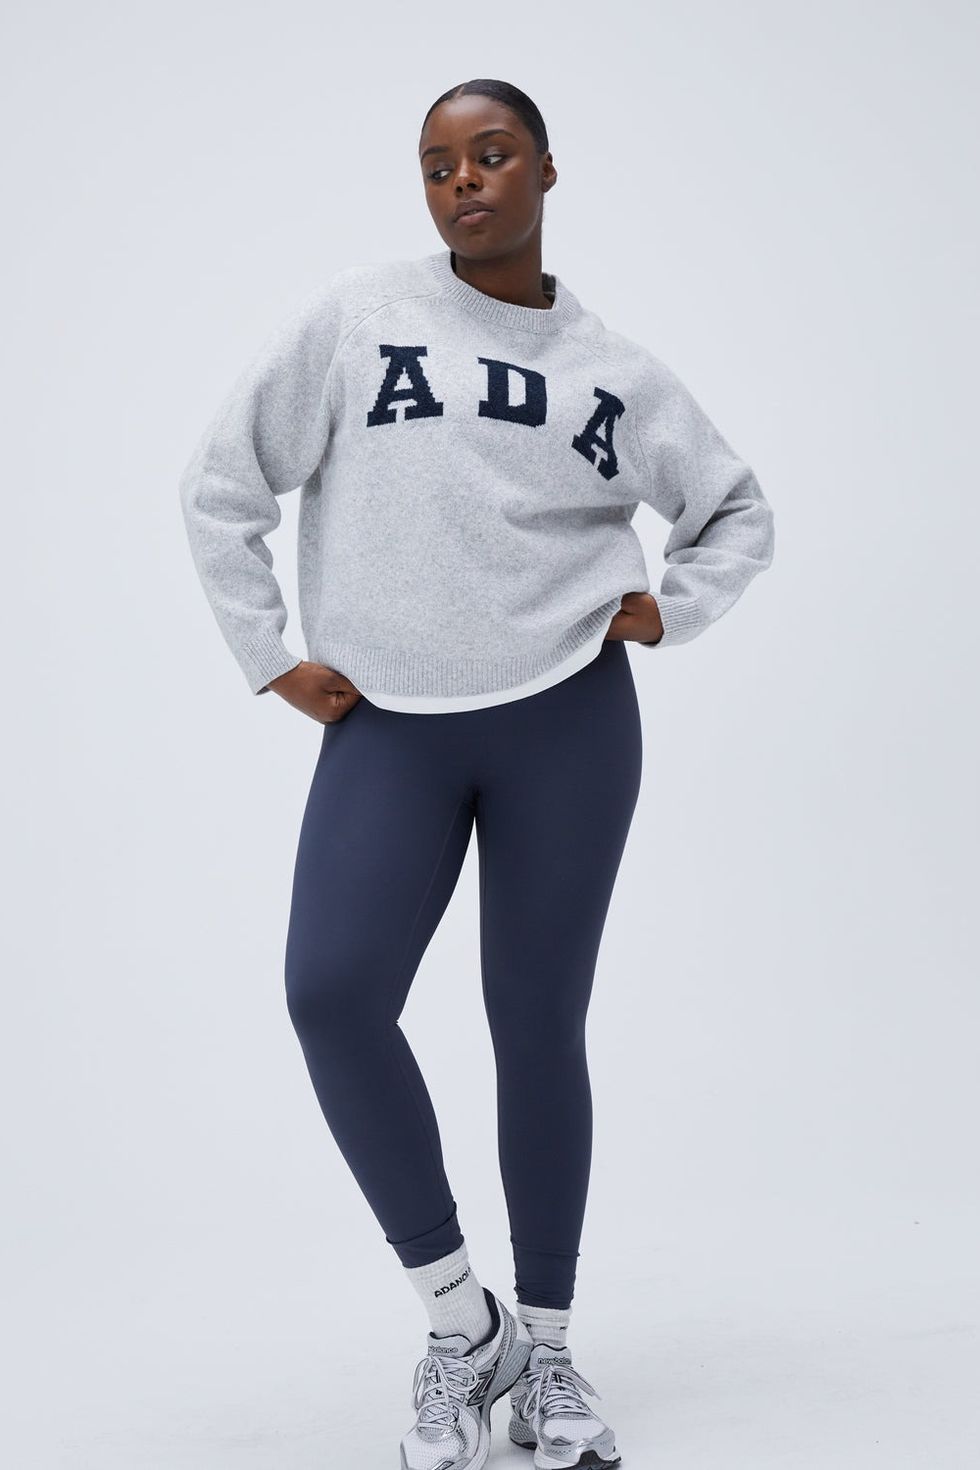 Set your alarms, Adanola's sell out sweatshirt is being restocked